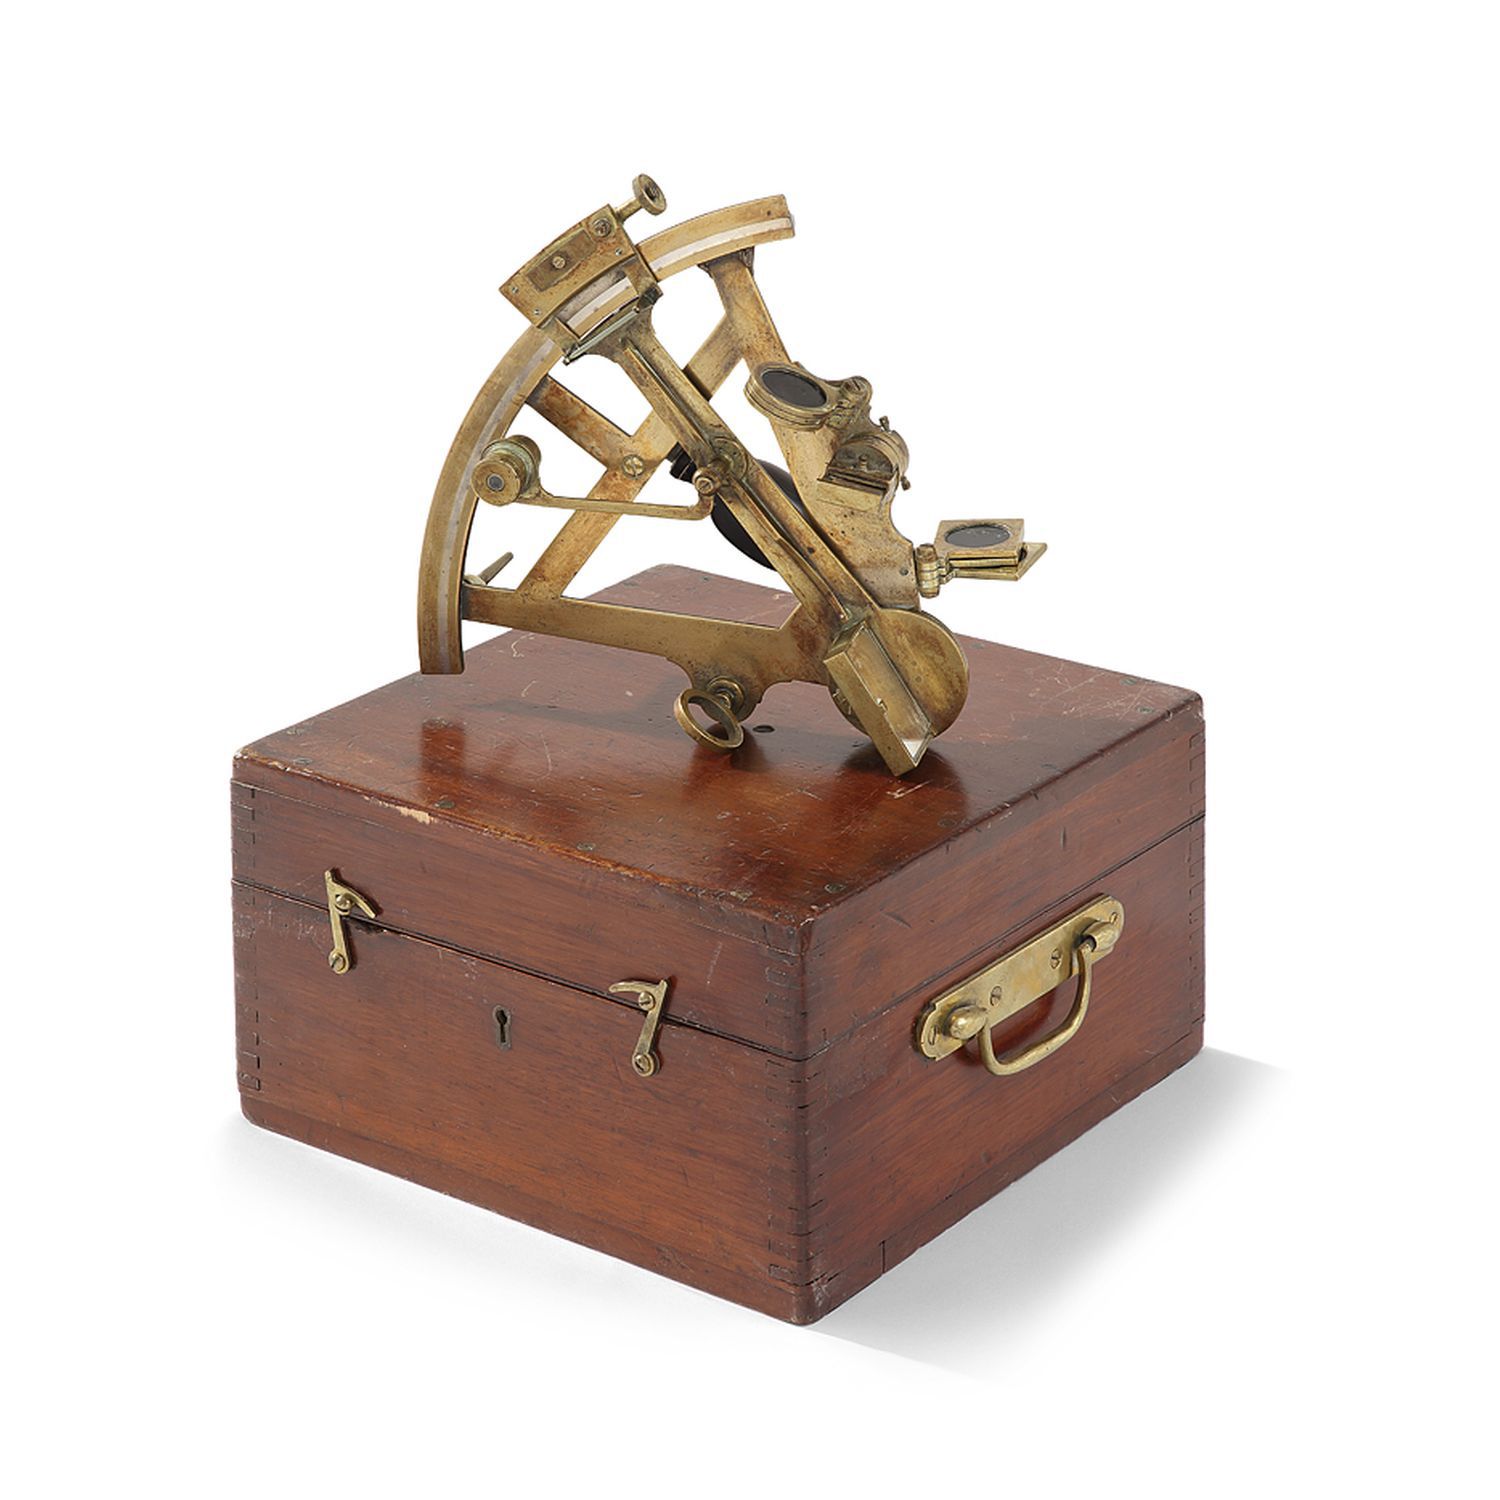 Null BRASS SEXTANT WITH ITS MAHOGANY CASE, CIRCA 1900
Missing the bezel and all &hellip;